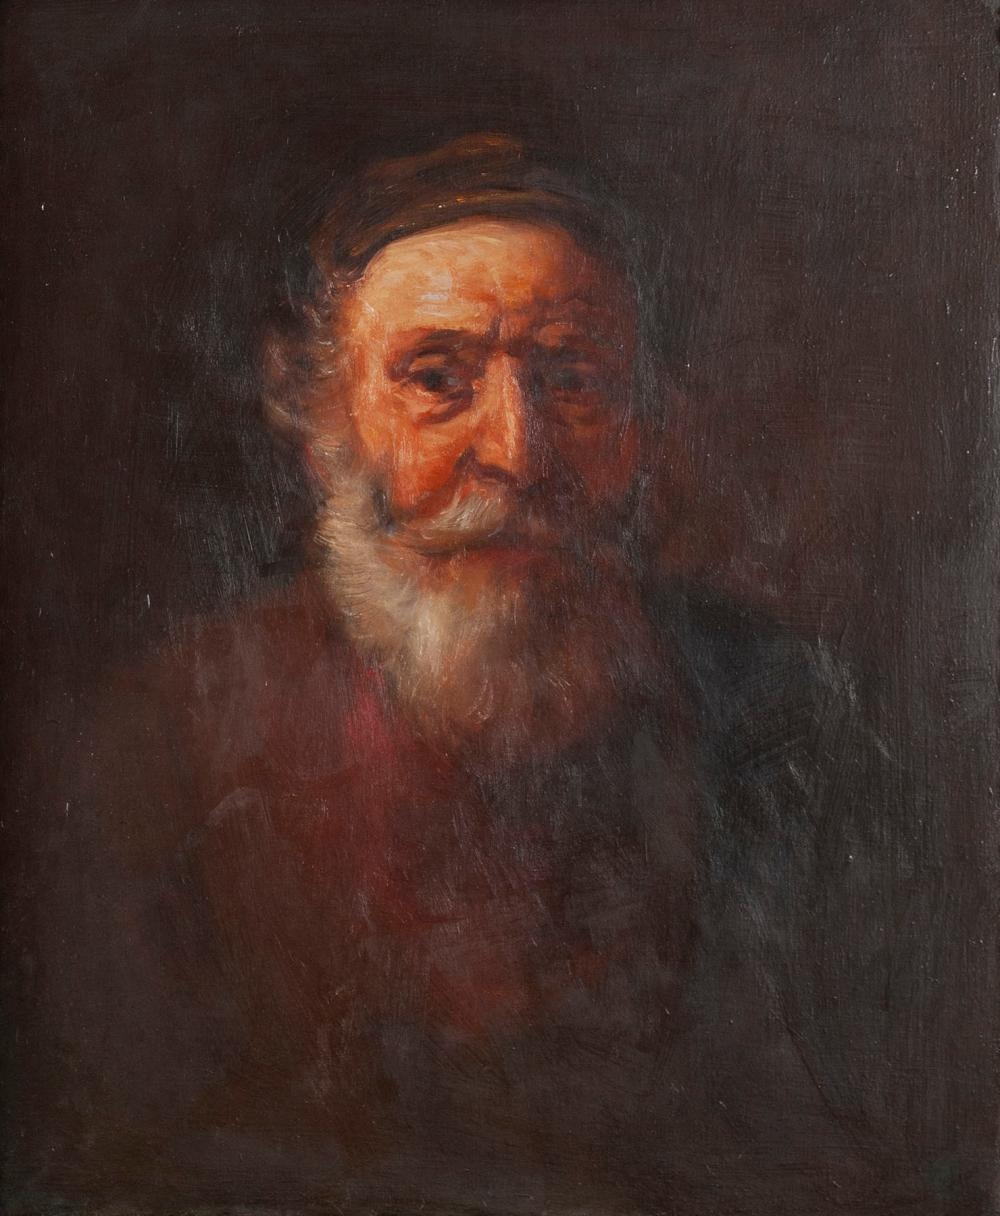 After Portrait of an Old Man in Red by Rembrandt van Rijn, 1654